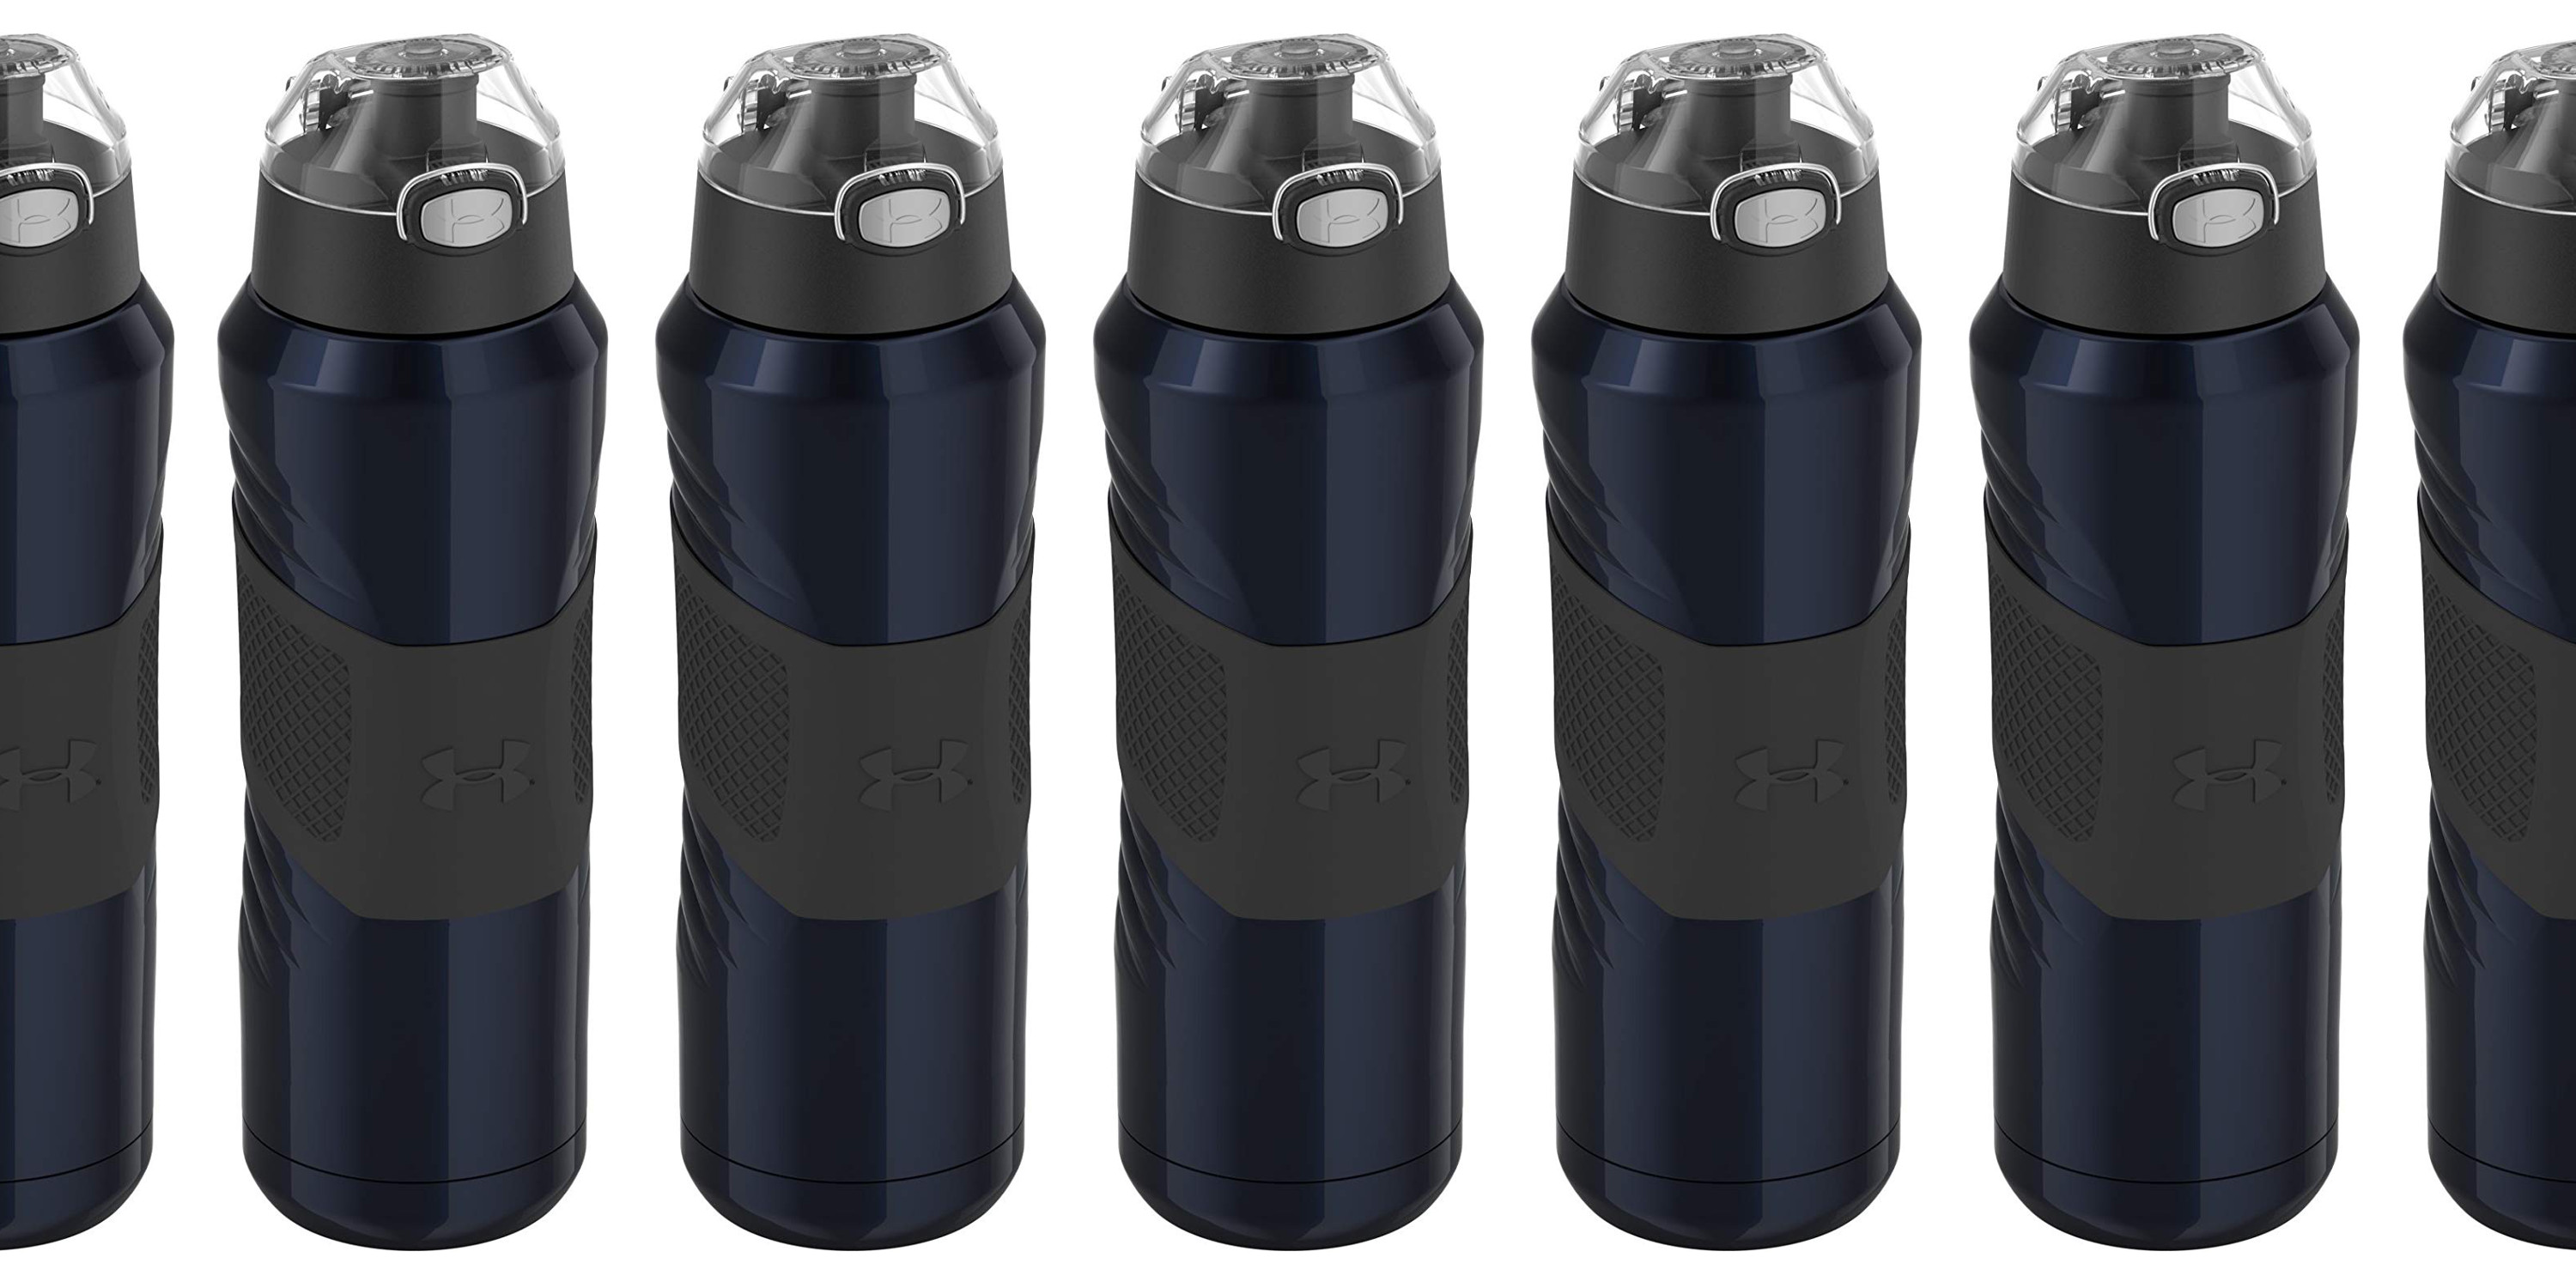 https://9to5toys.com/wp-content/uploads/sites/5/2019/03/Under-Armour-Dominate-24-Ounce-Vacuum-Insulated-Stainless-Steel-Bottle.jpg